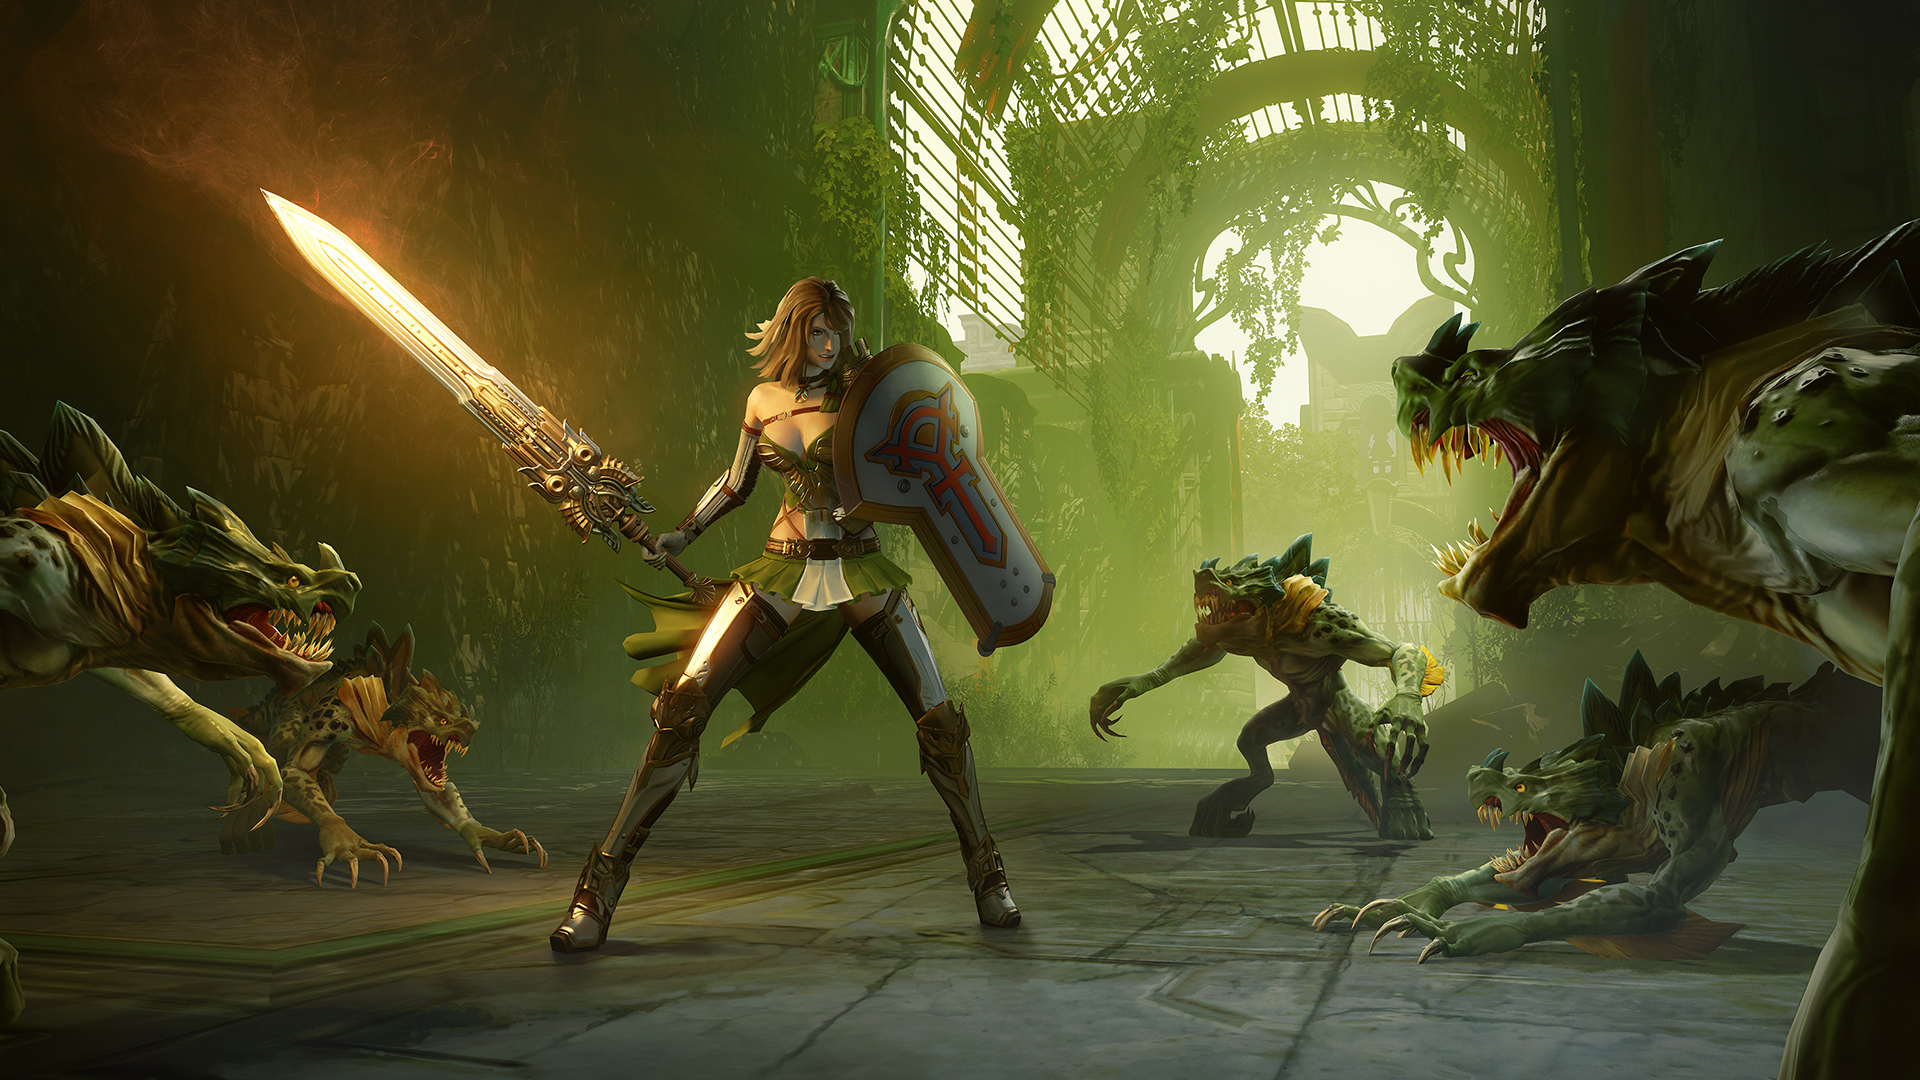 Free-to-Play Action MMO Skyforge Coming to Xbox One in November